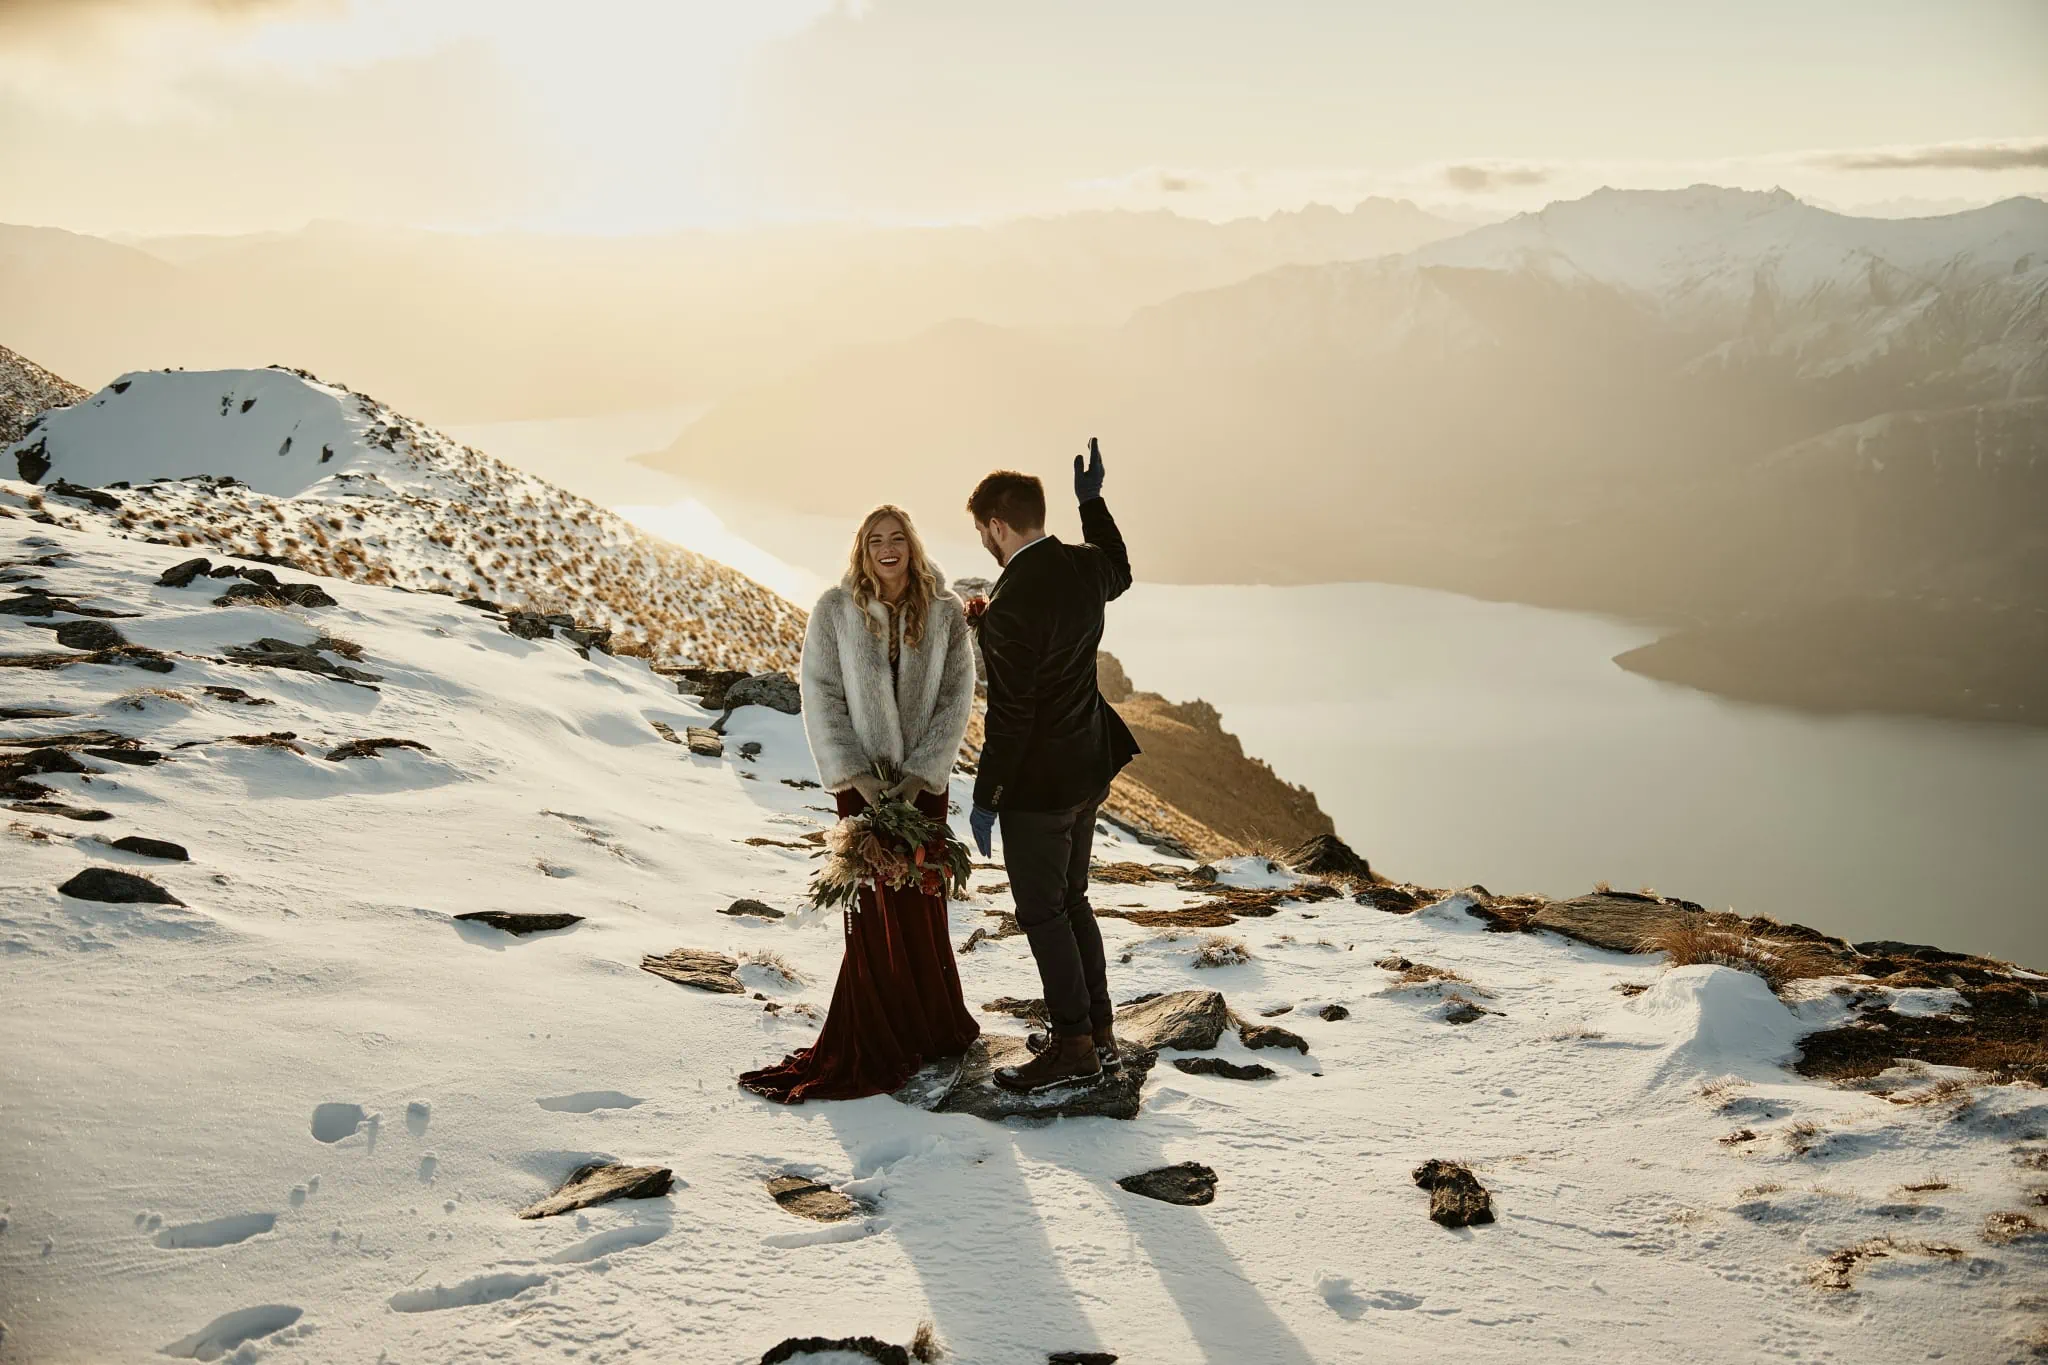 Claire and Rob's heli elopement wedding at Cecil Peak, with a bride and groom standing on top of a snowy mountain overlooking Lake Wanaka.